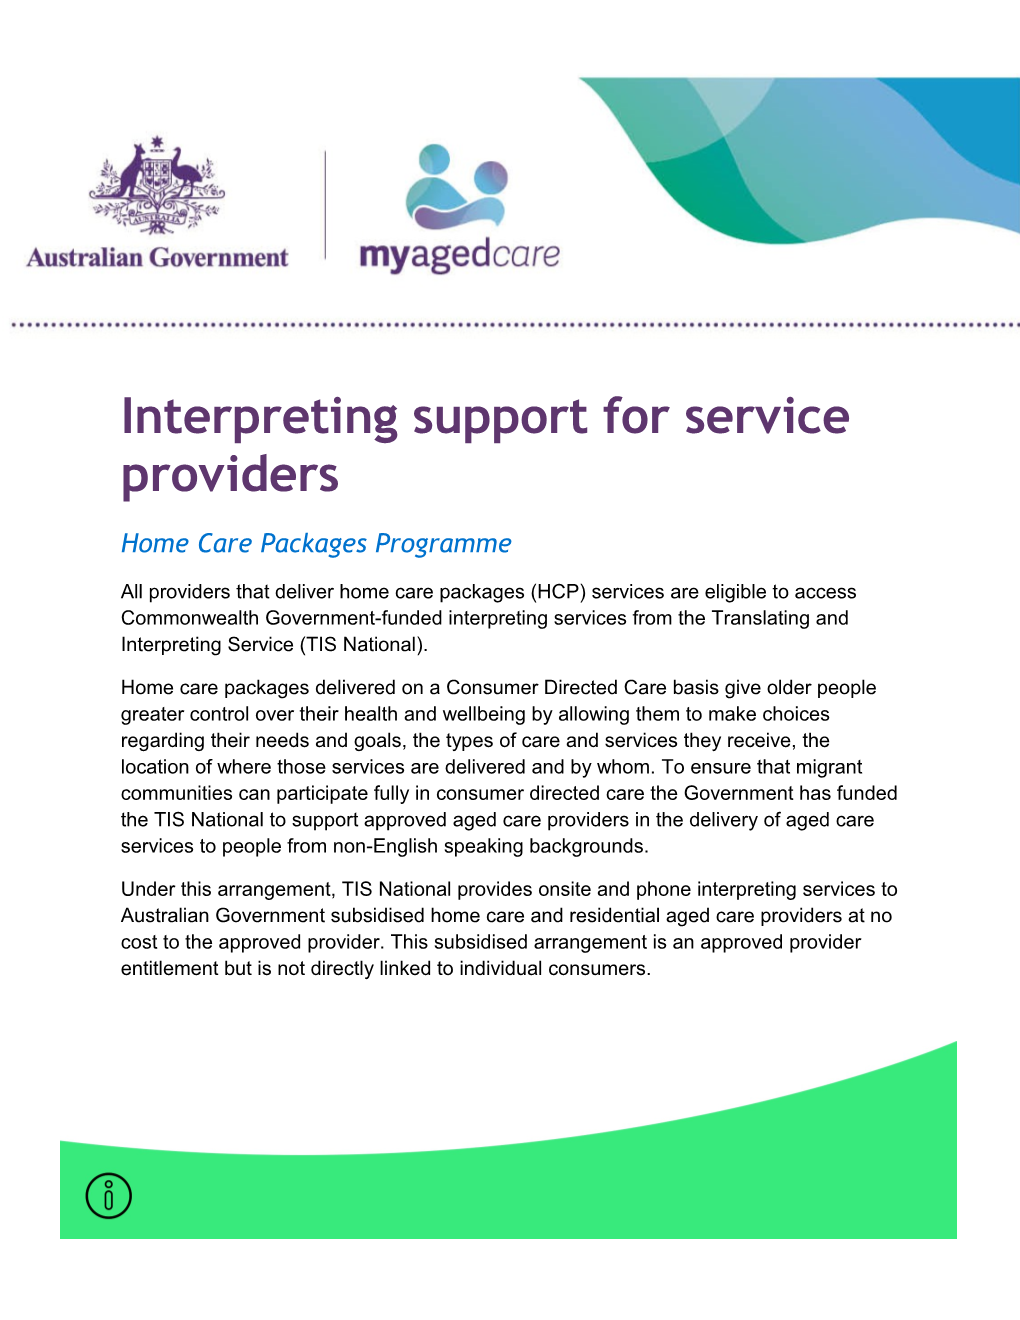 Interpreting Support for Service Providers Fact Sheet